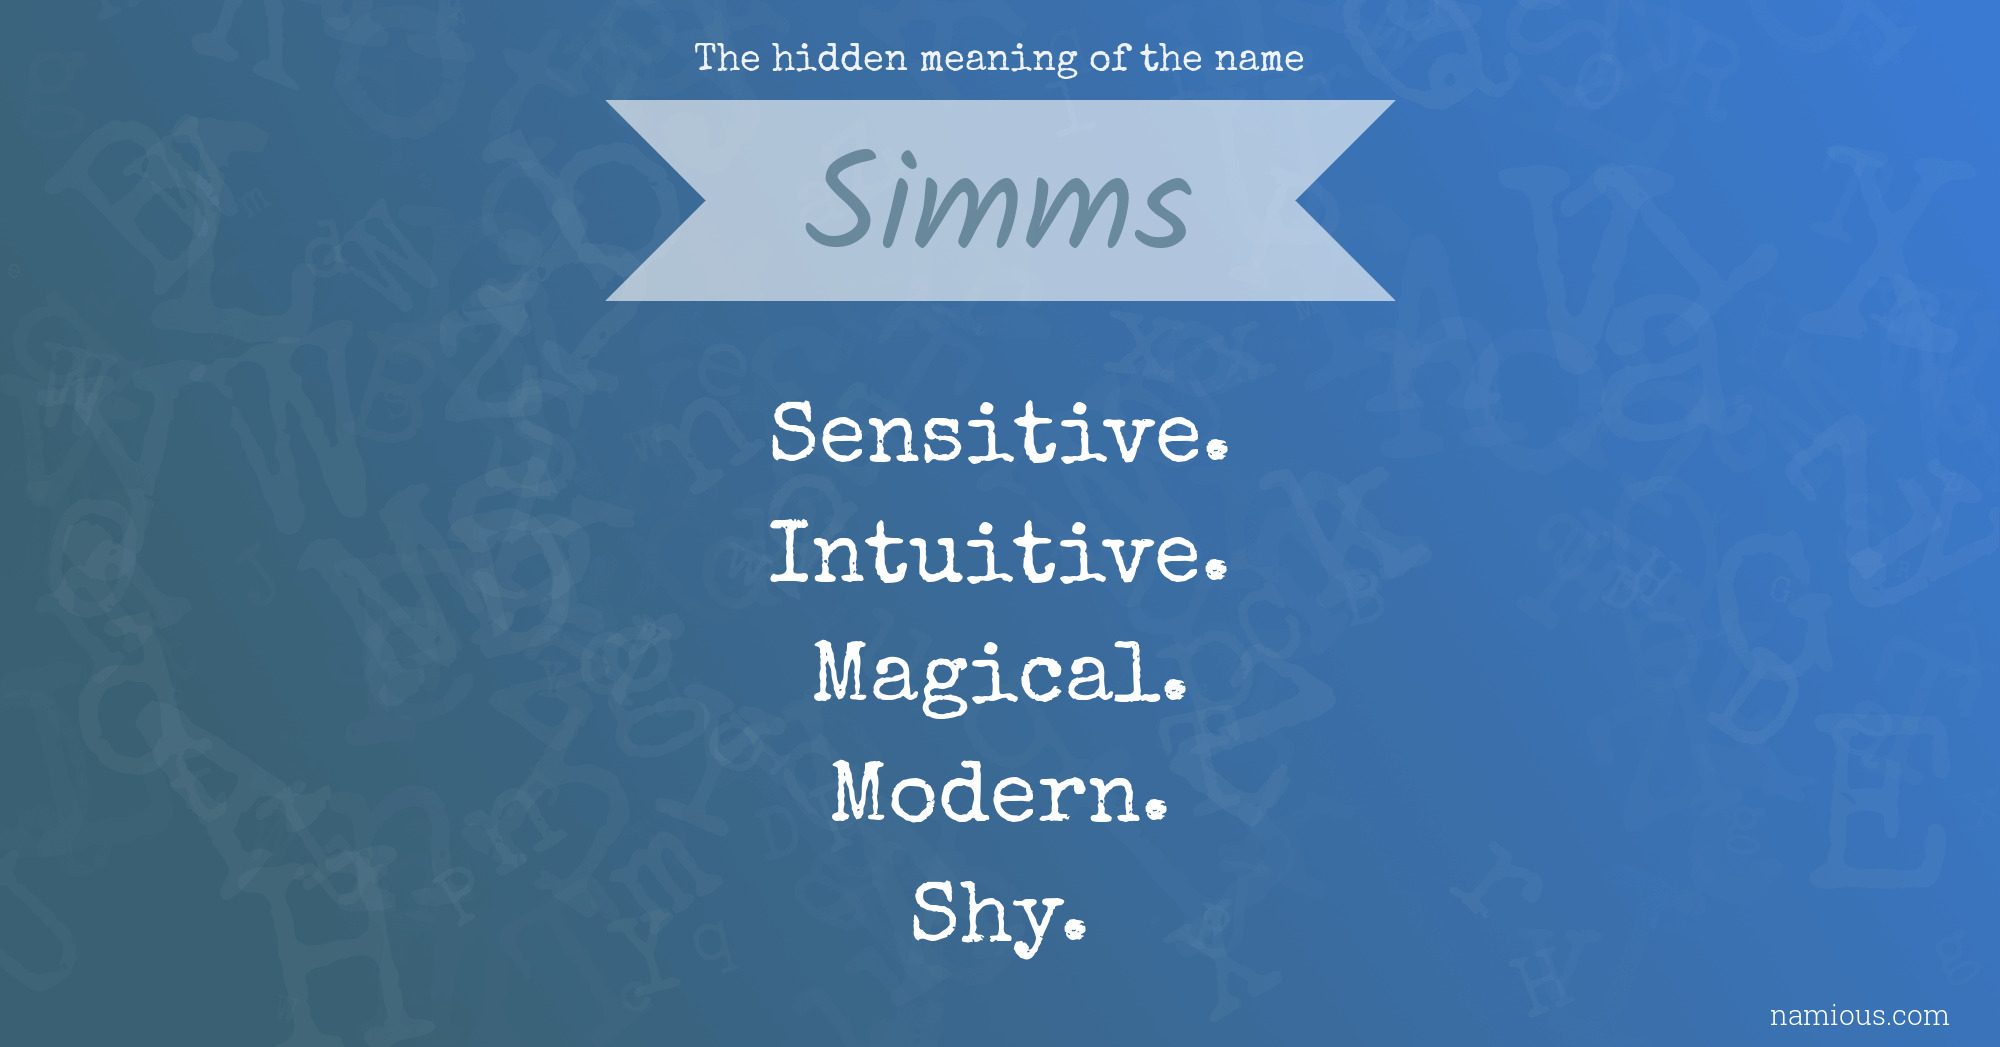 The hidden meaning of the name Simms